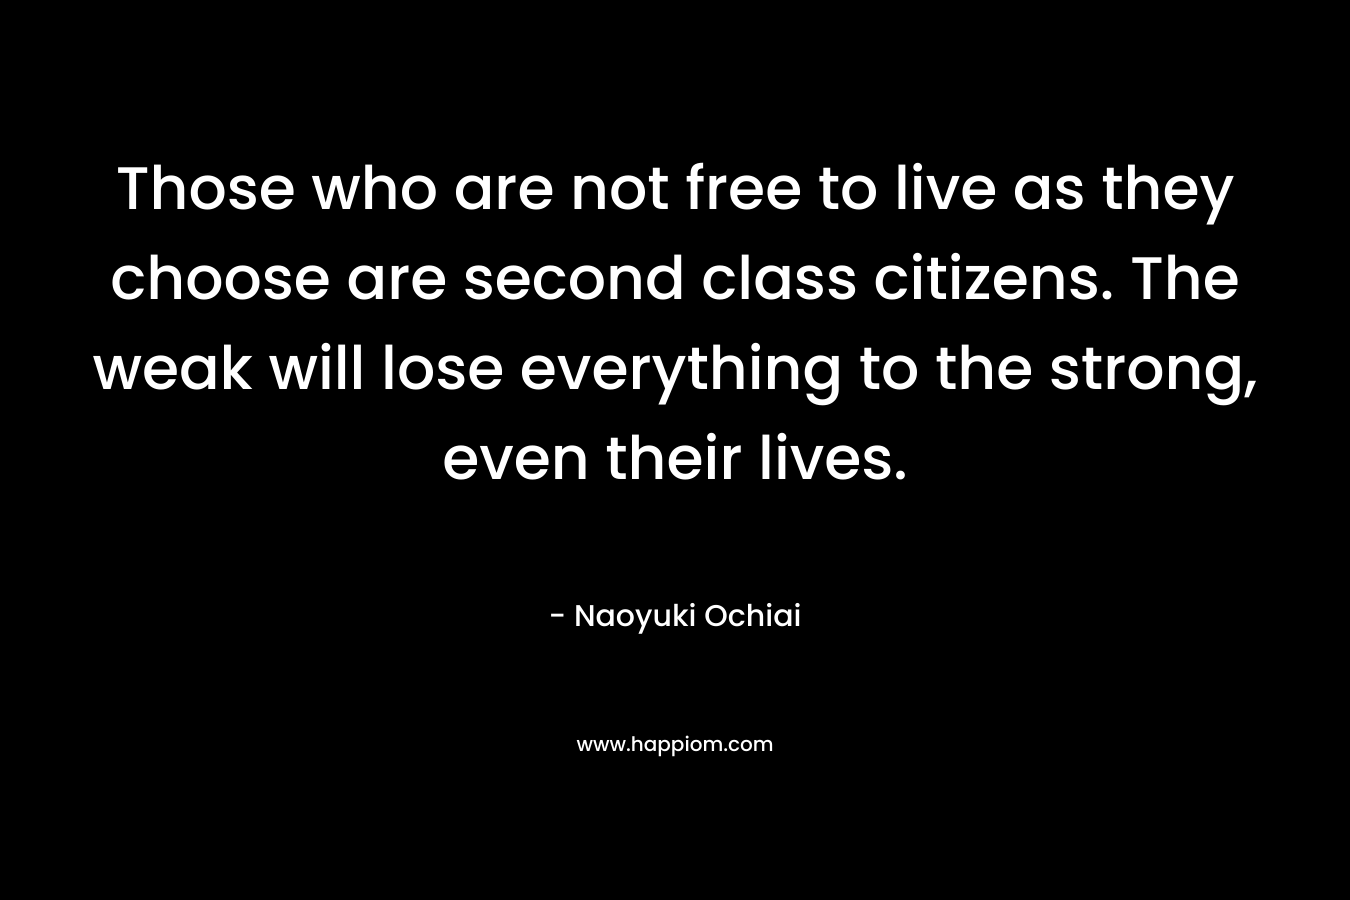 Those who are not free to live as they choose are second class citizens. The weak will lose everything to the strong, even their lives.